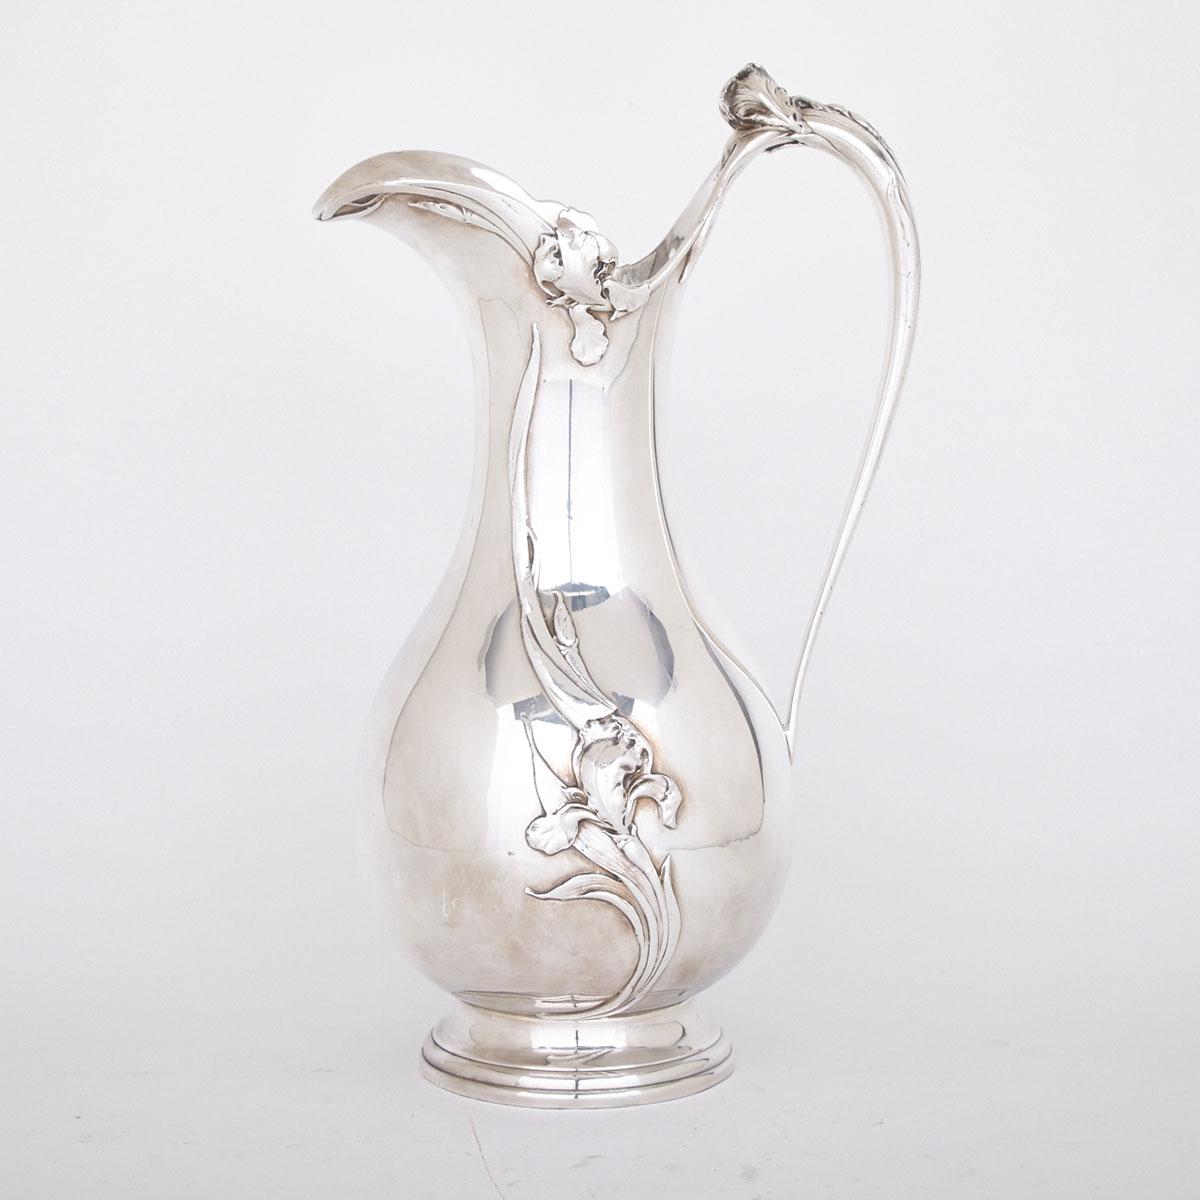 American Silver Plated Art Nouveau Large Ewer, Reed and Barton, Taunton Mass., early 20th century